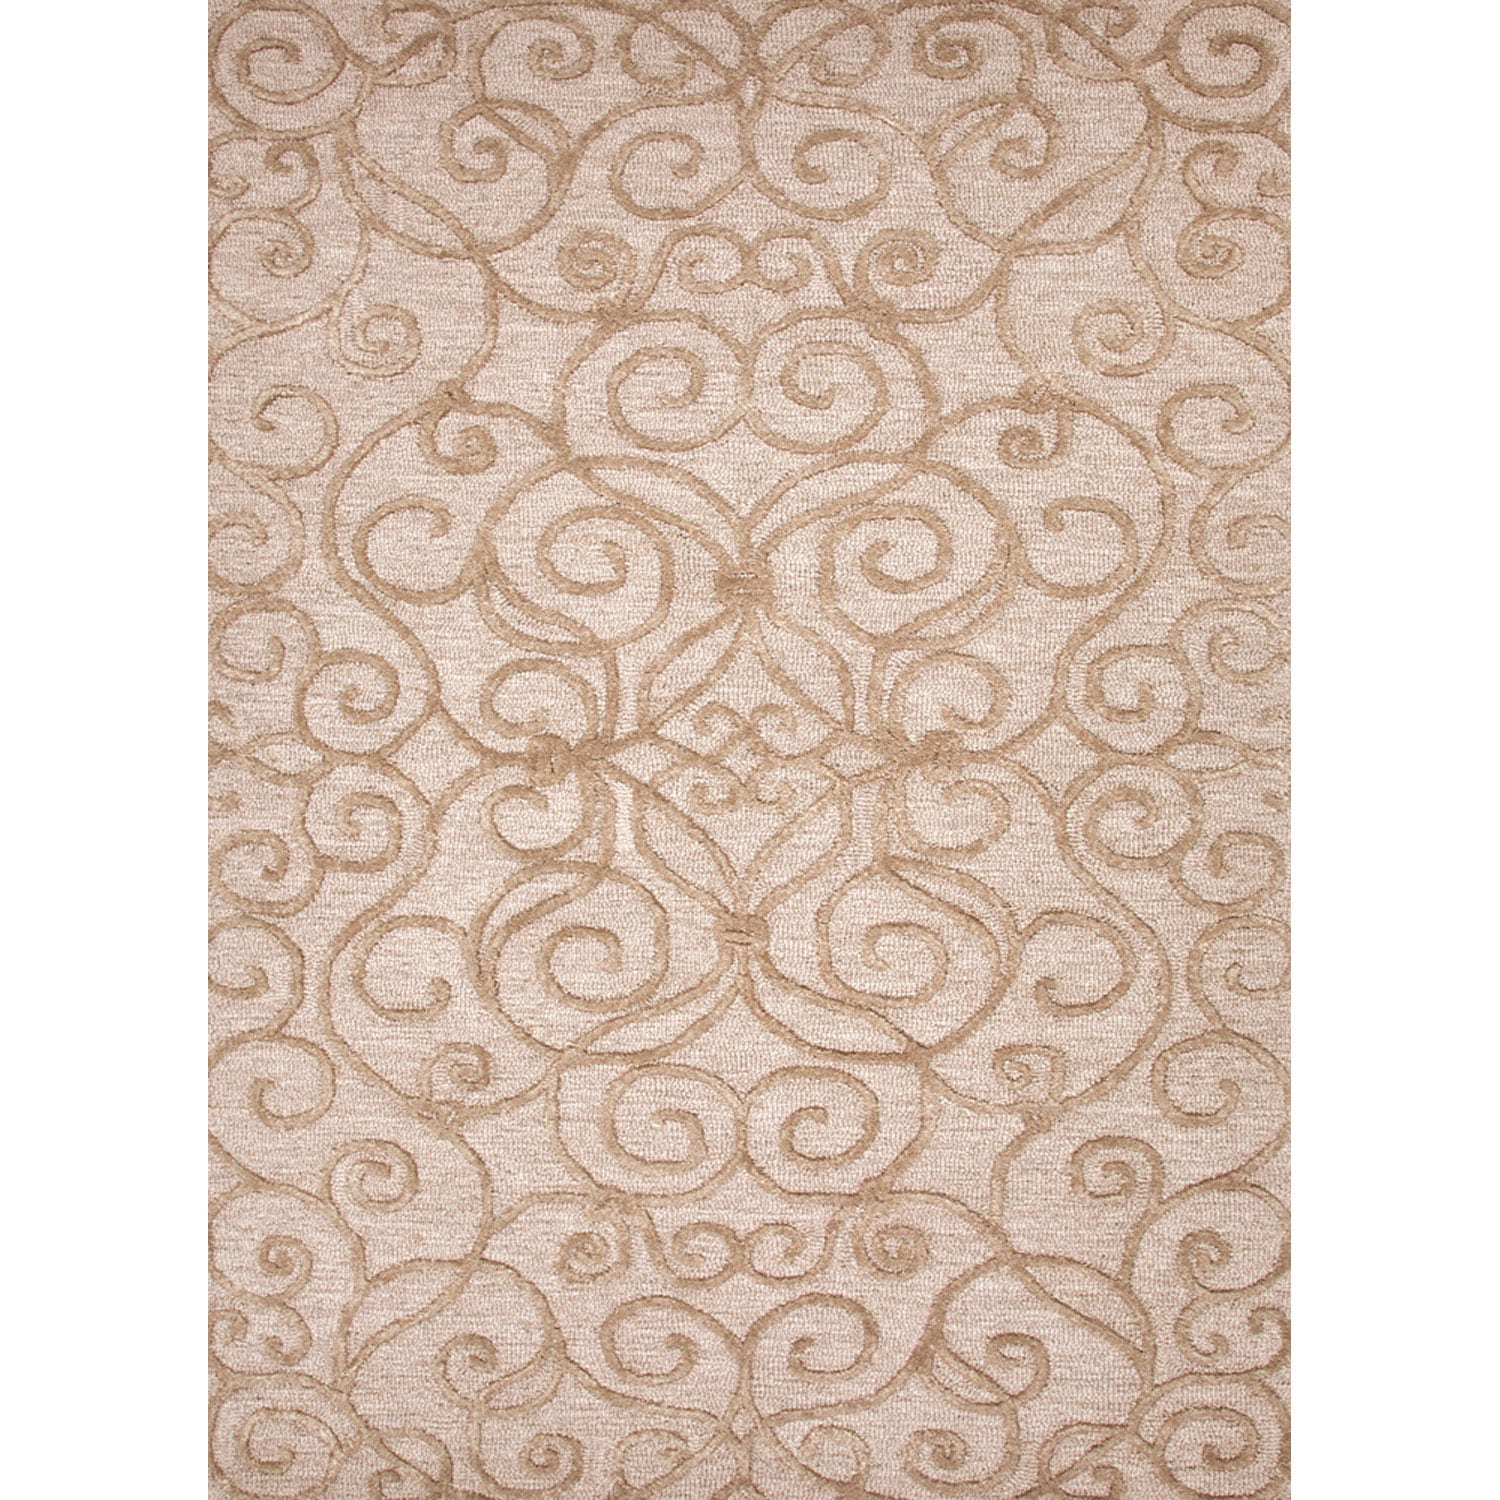 Hand tufted Textured Transitional Floral Pattern Brown Rug (96 X 136)